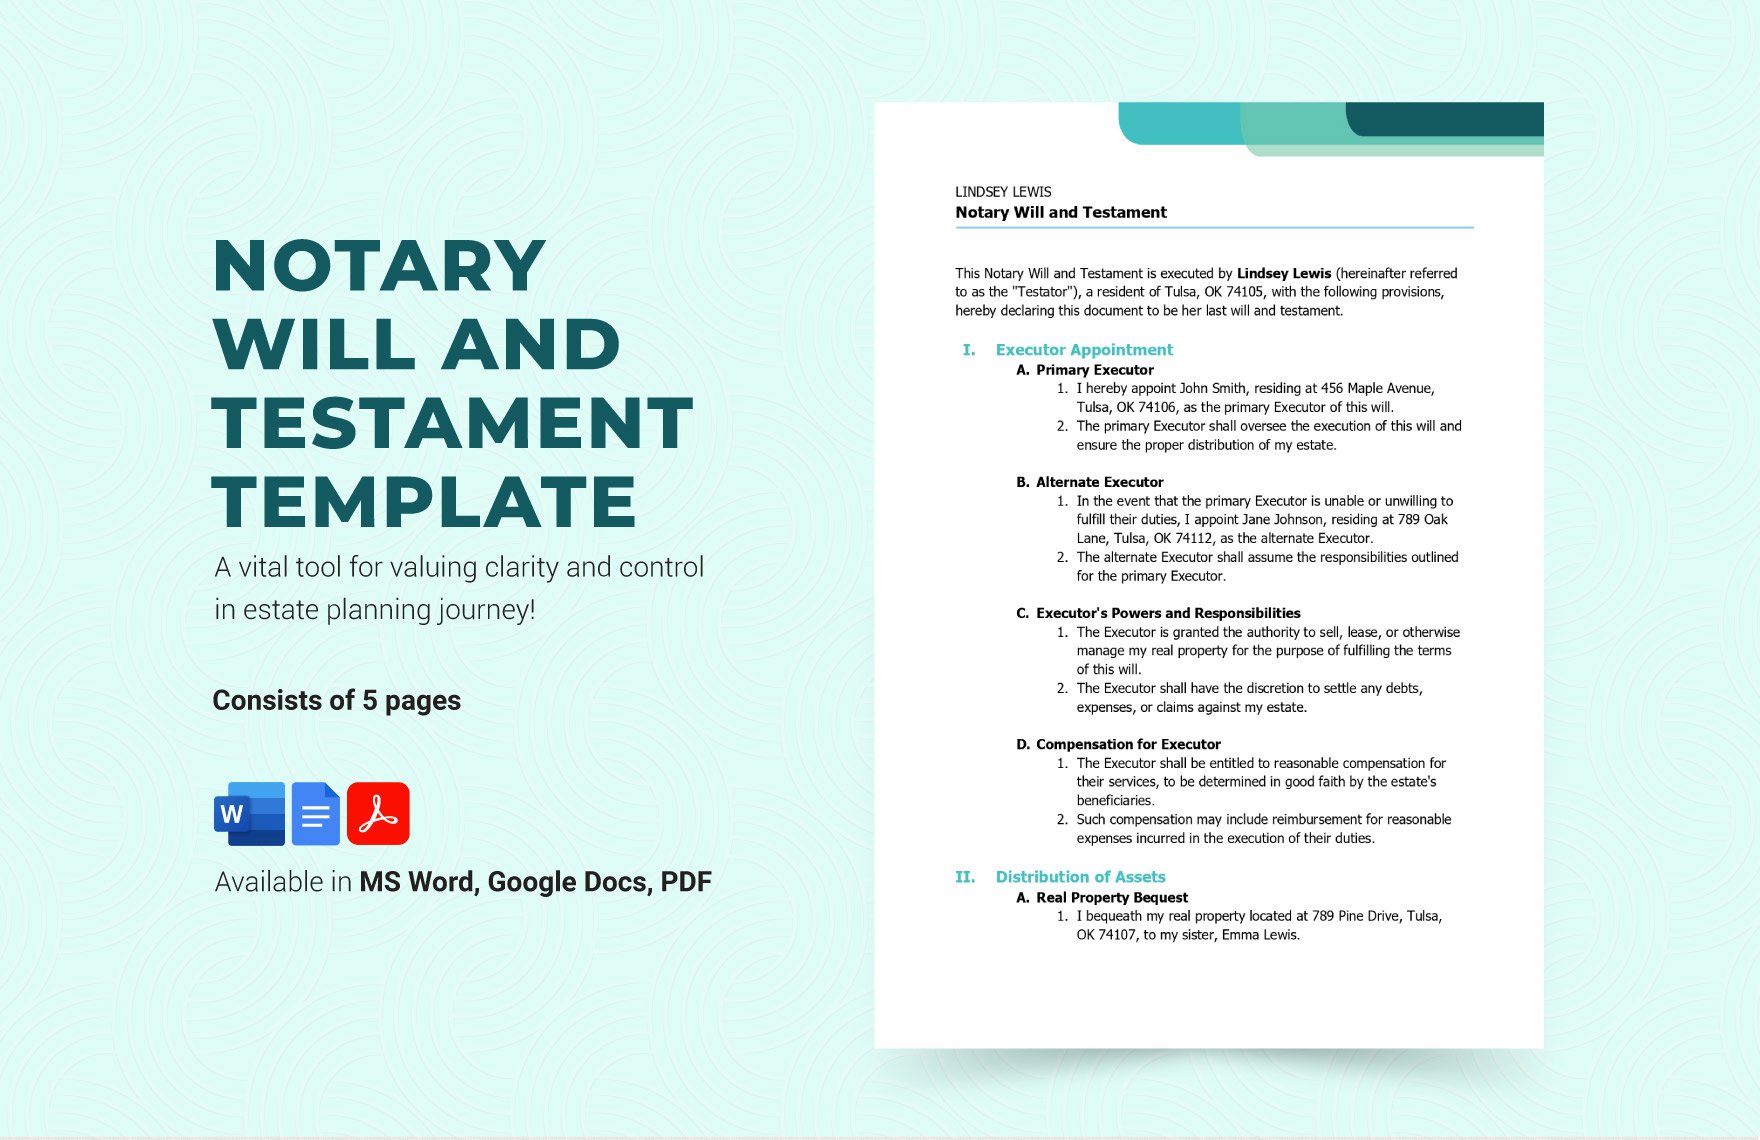 Free Notary Will and Testament Template in Word, Google Docs, PDF